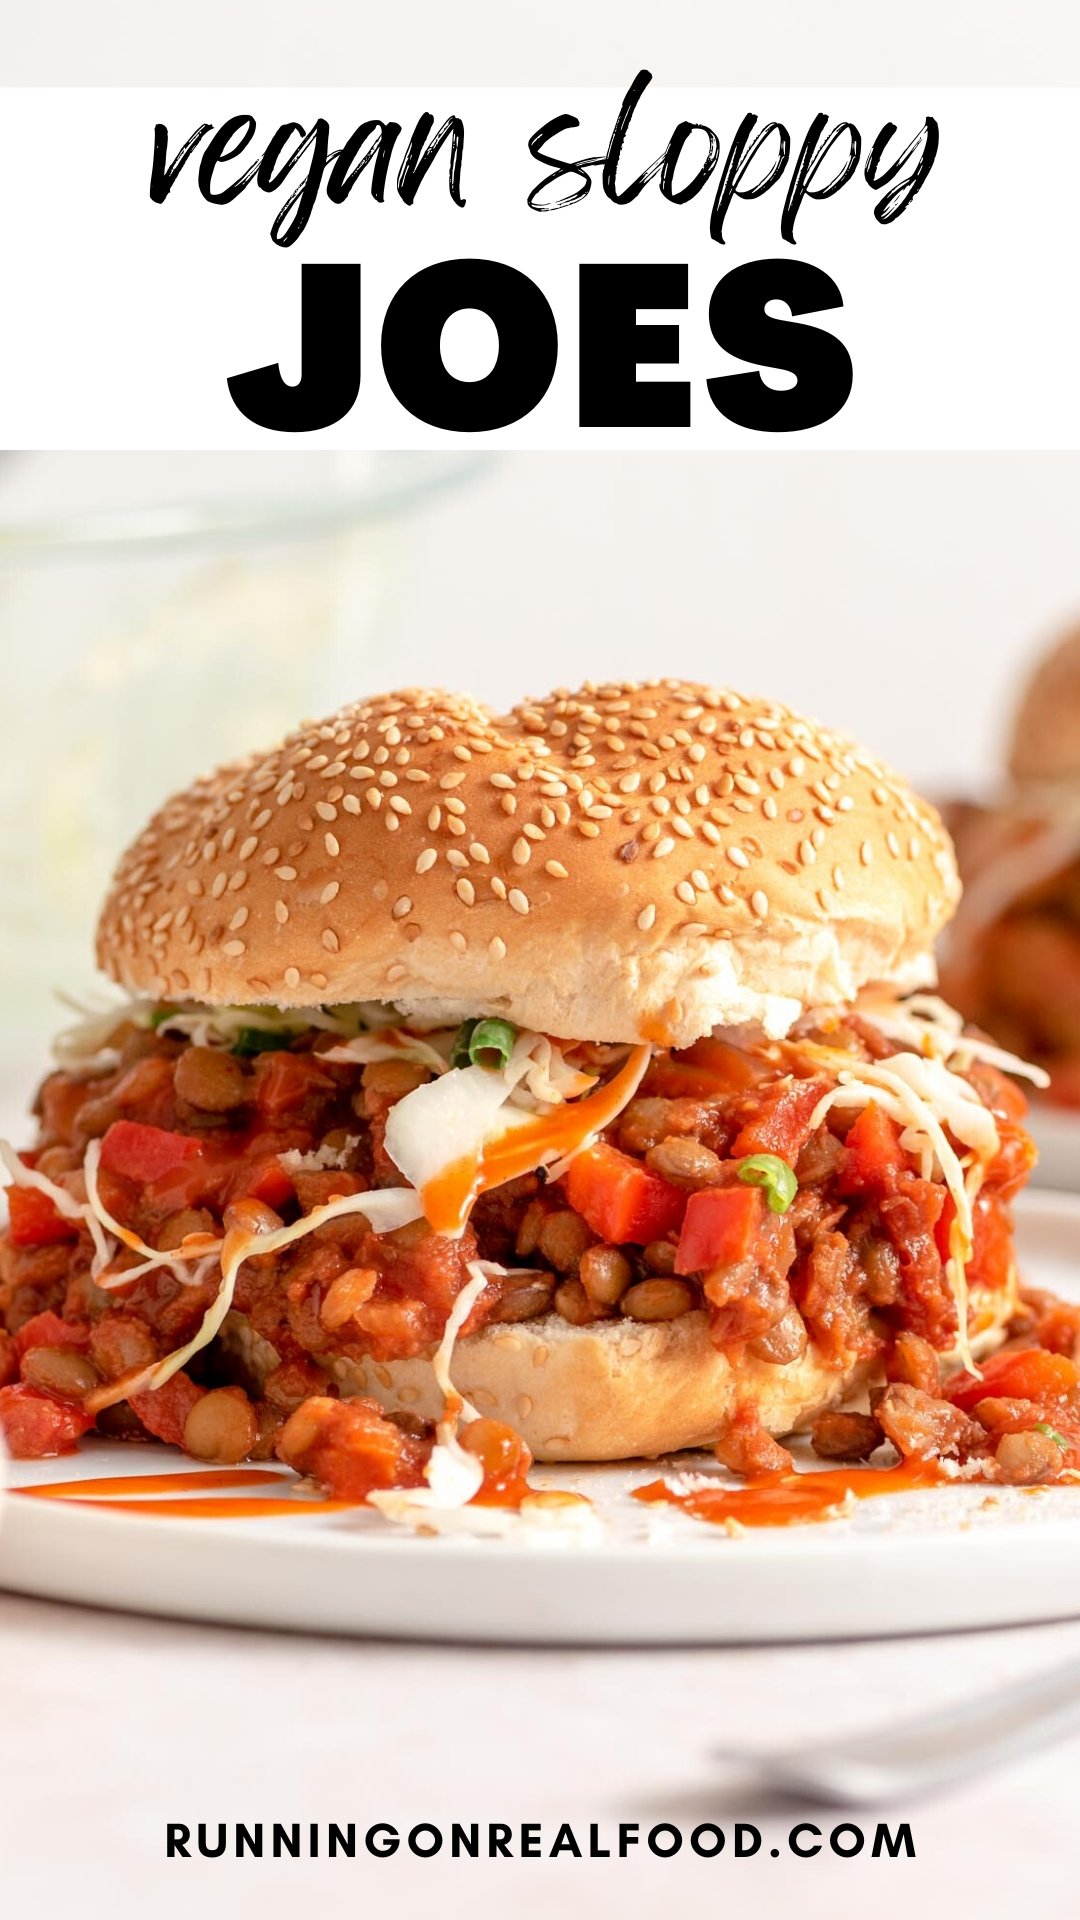 Pinterest graphic for Vegan Lentil Sloppy Joes with an image of the recipe and a text caption